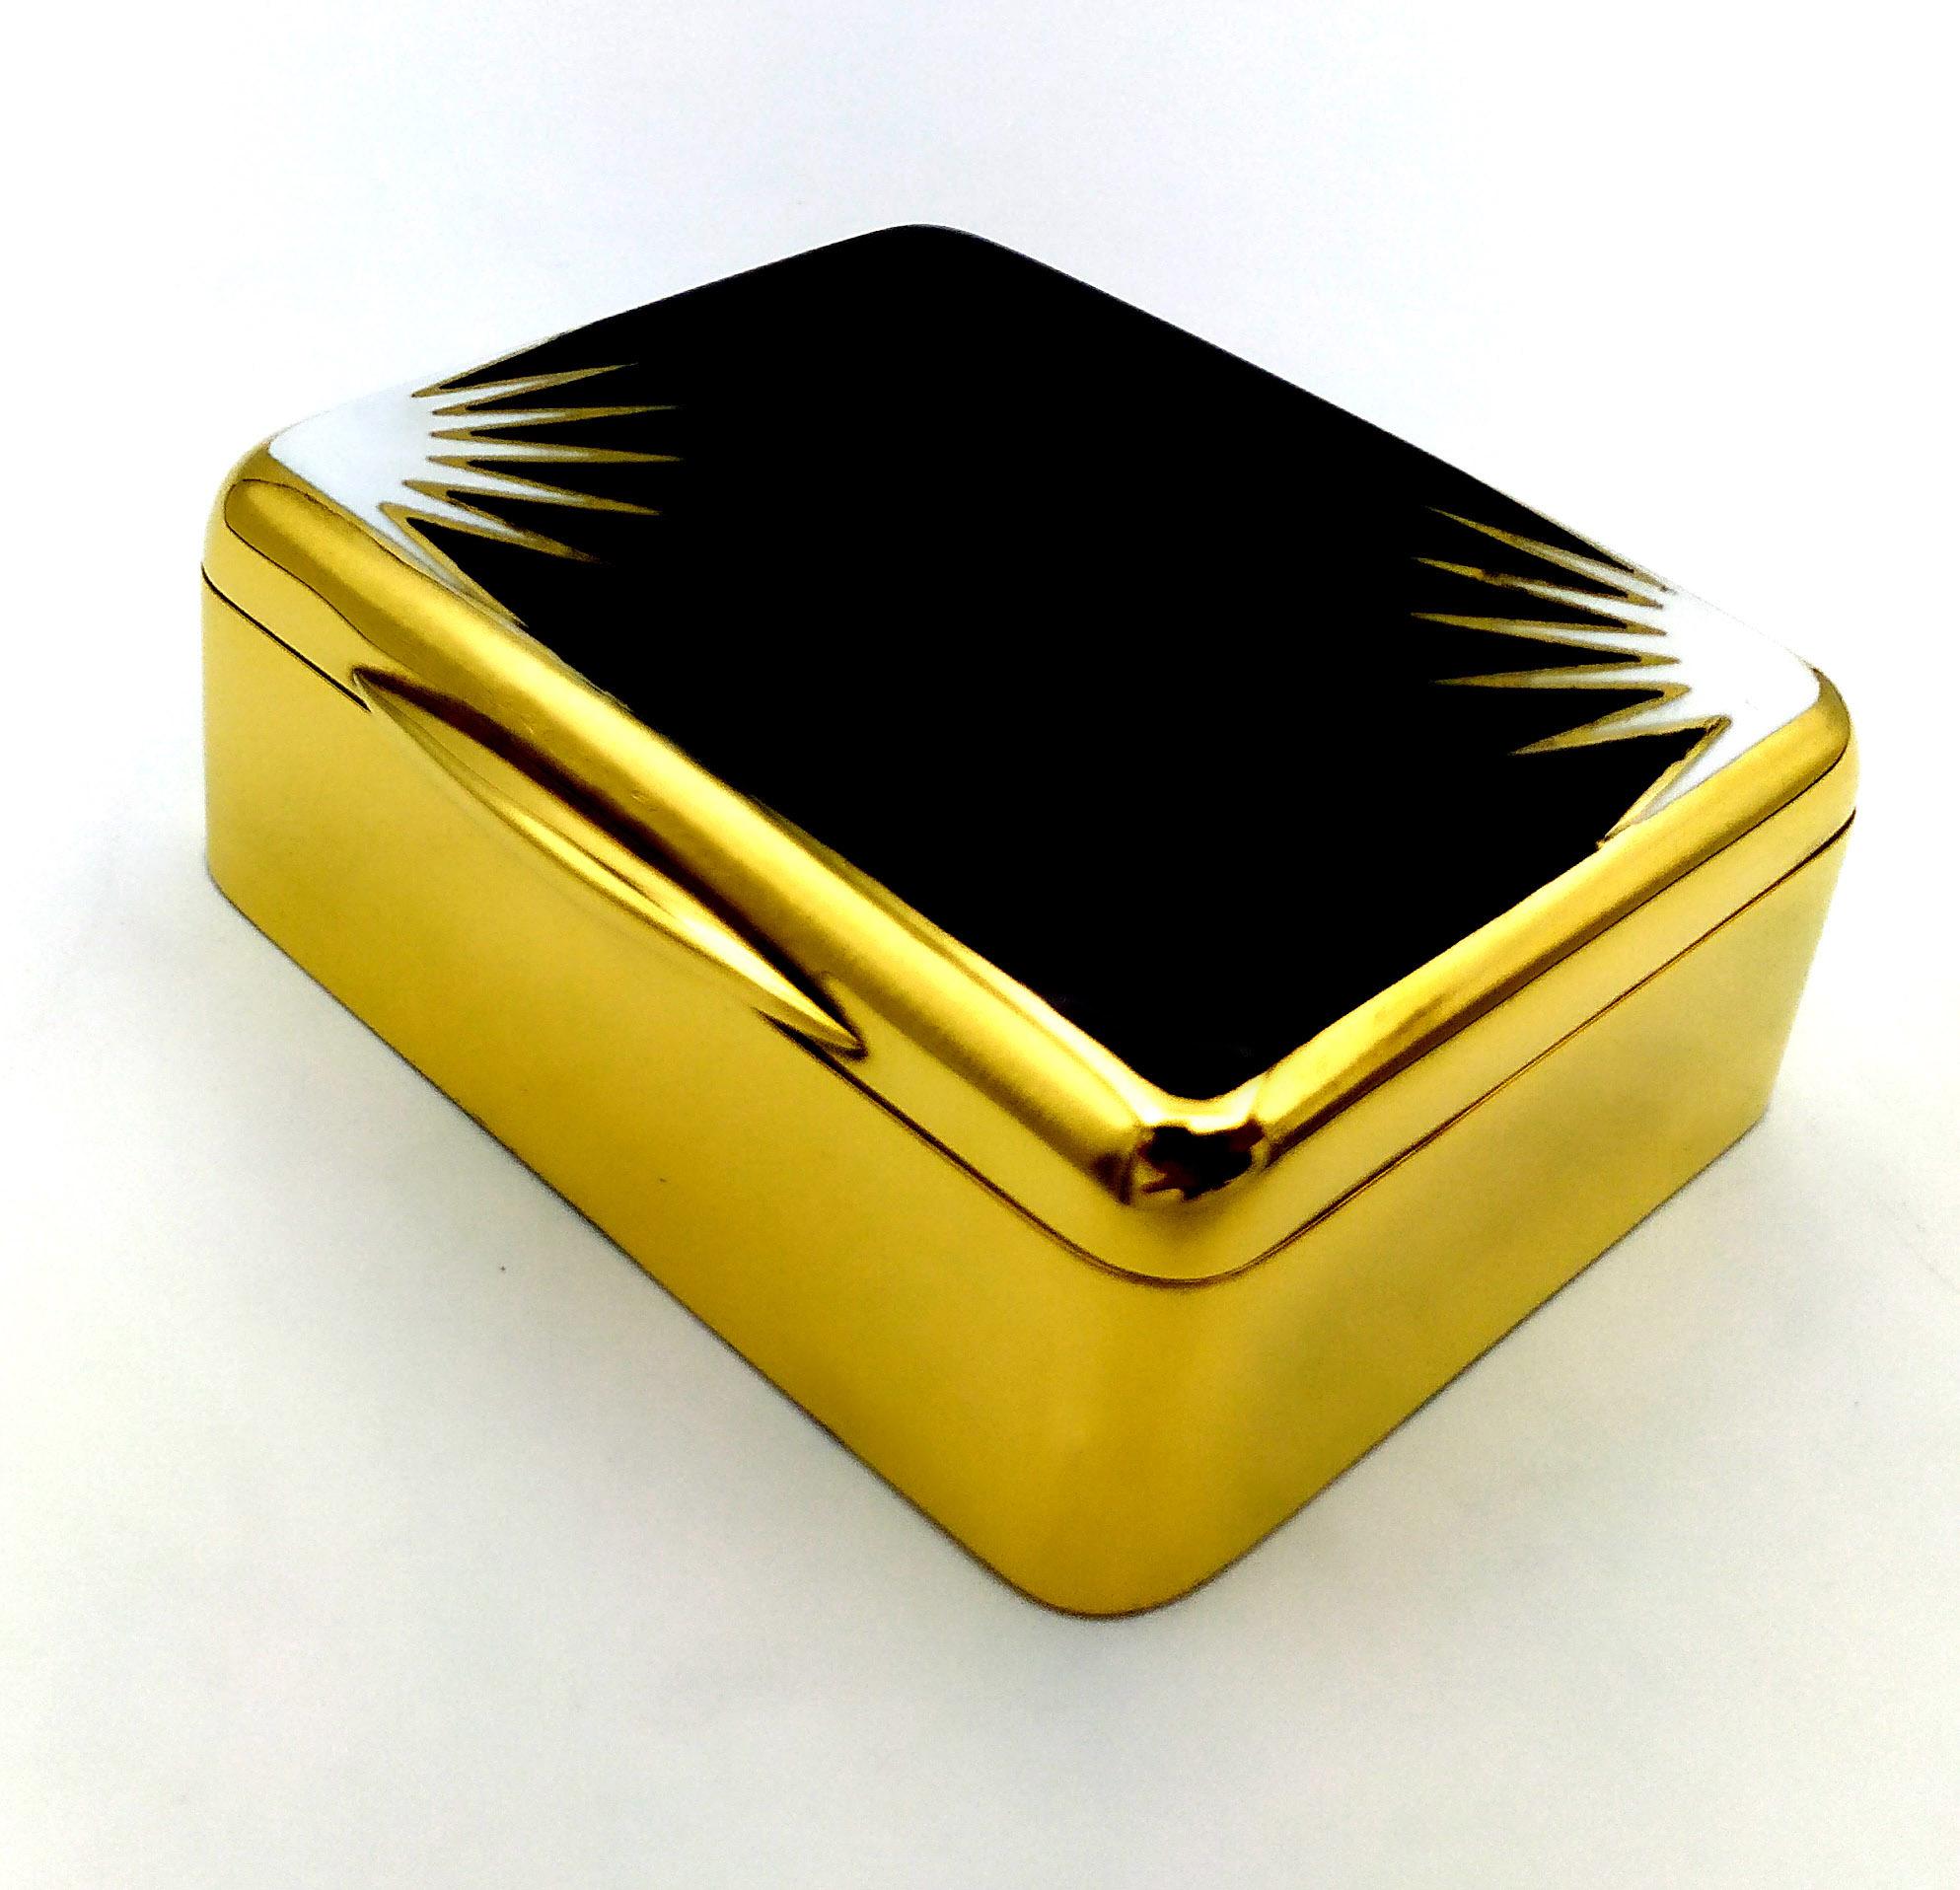 Rectangular table box with rounded corners in 925/1000 sterling silver gold plated with Art Deco style design on lid with rays on two corners and black and white fire enamel. Measures 7.8 x 9.4 x 3.5 cm. Weight gr. 230. Designed by Giorgio Salimbeni